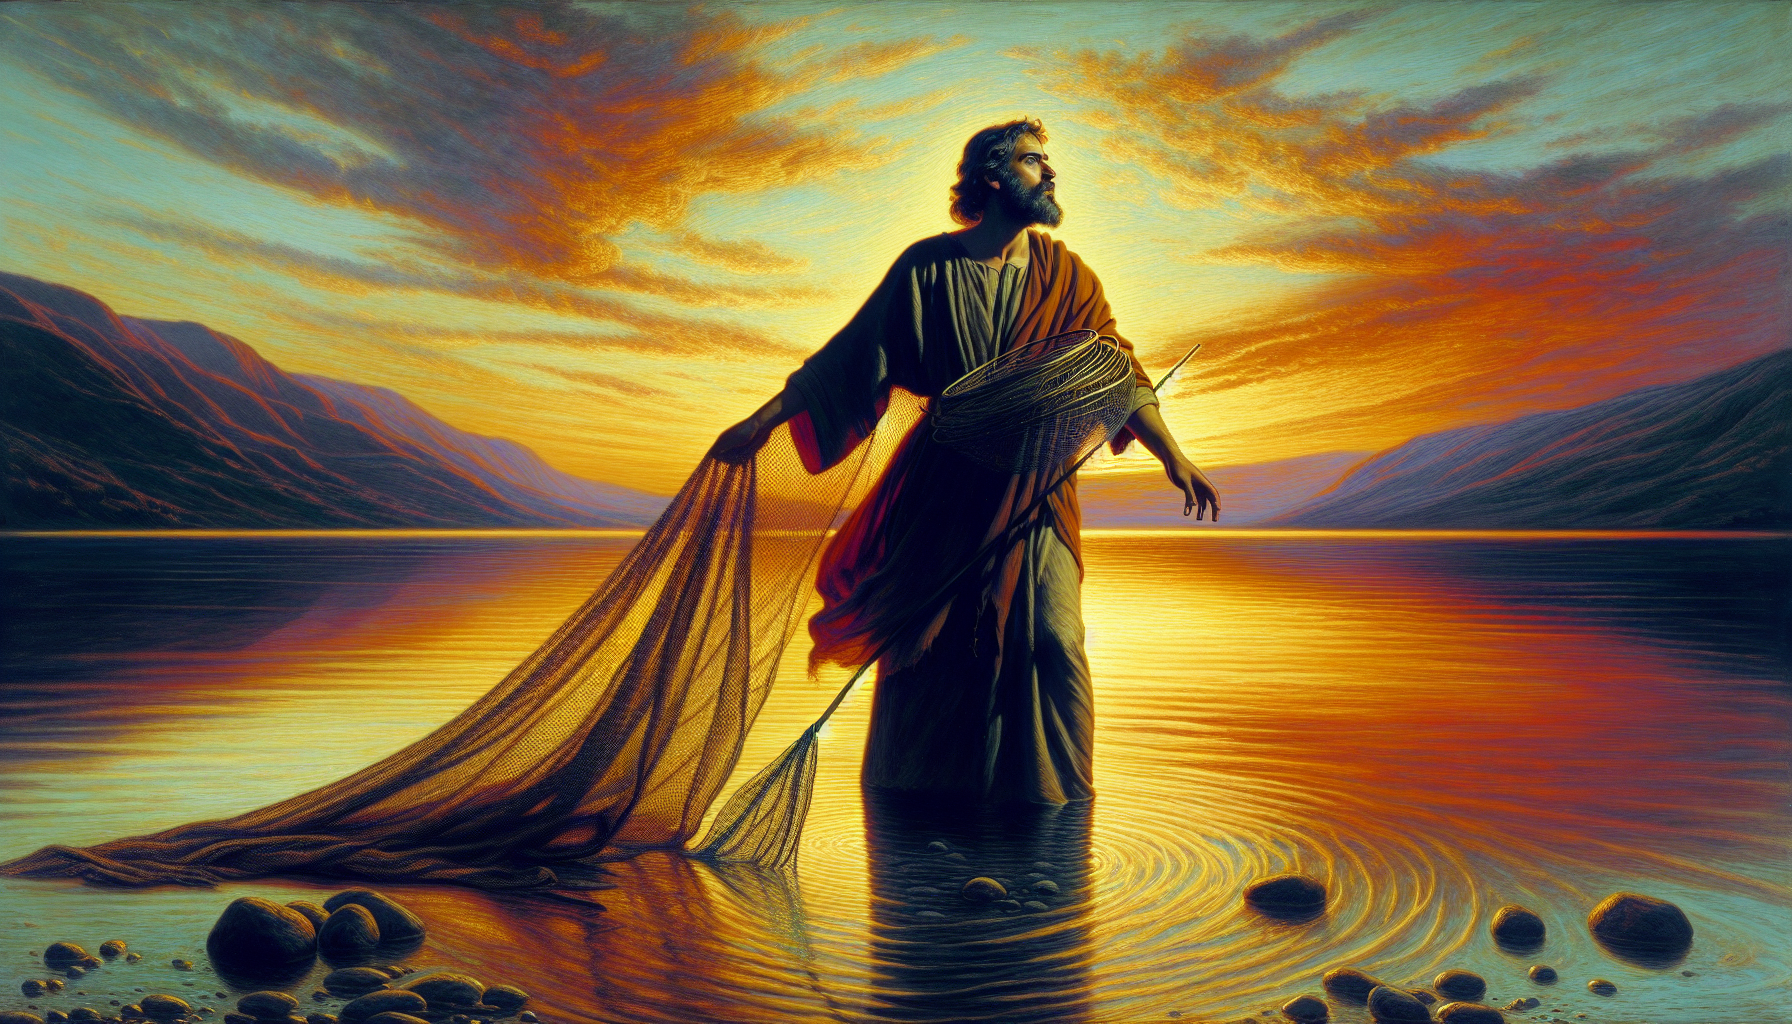 An artistic representation of San Andrés Apóstol standing by the shores of the Sea of Galilee, holding a fishing net, with a serene sunset in the background, symbolizing his life as a fisherman and fo